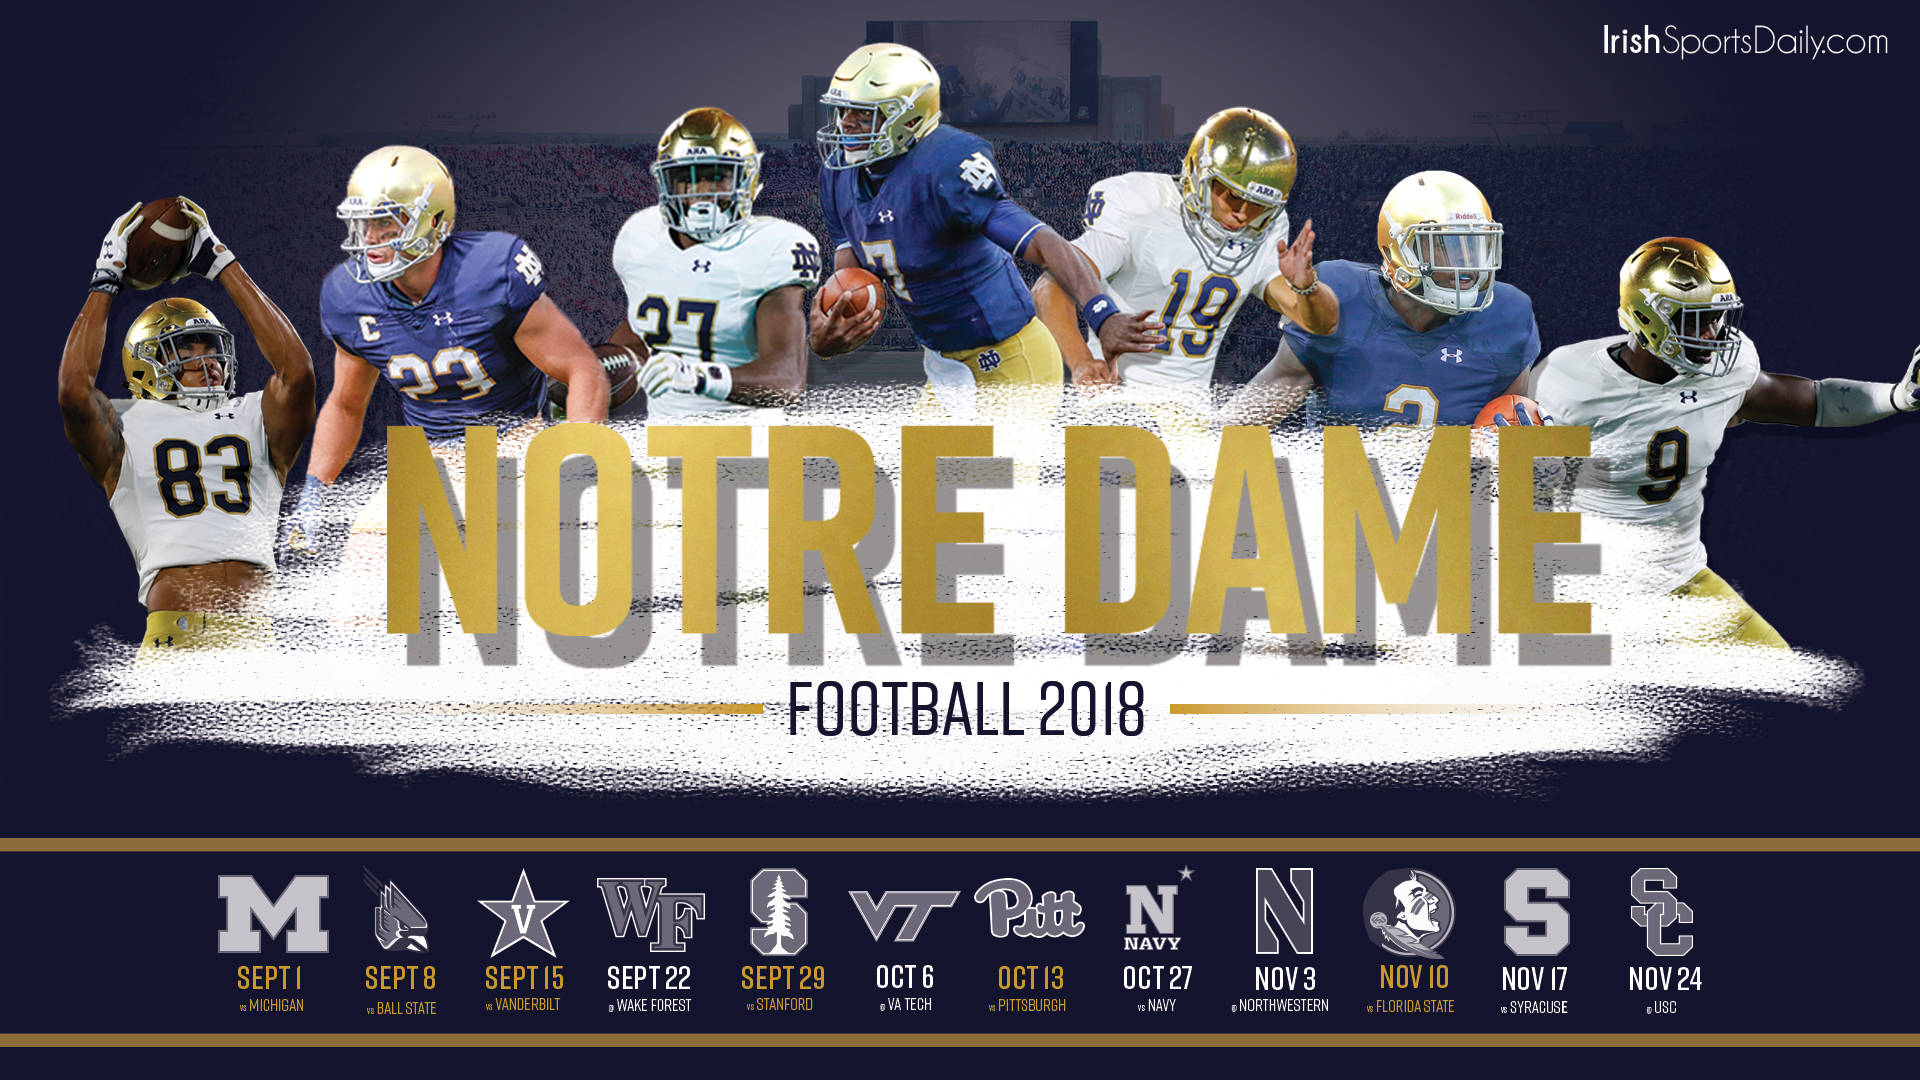 Show your Fighting Irish spirit and support Notre Dame Football! Wallpaper